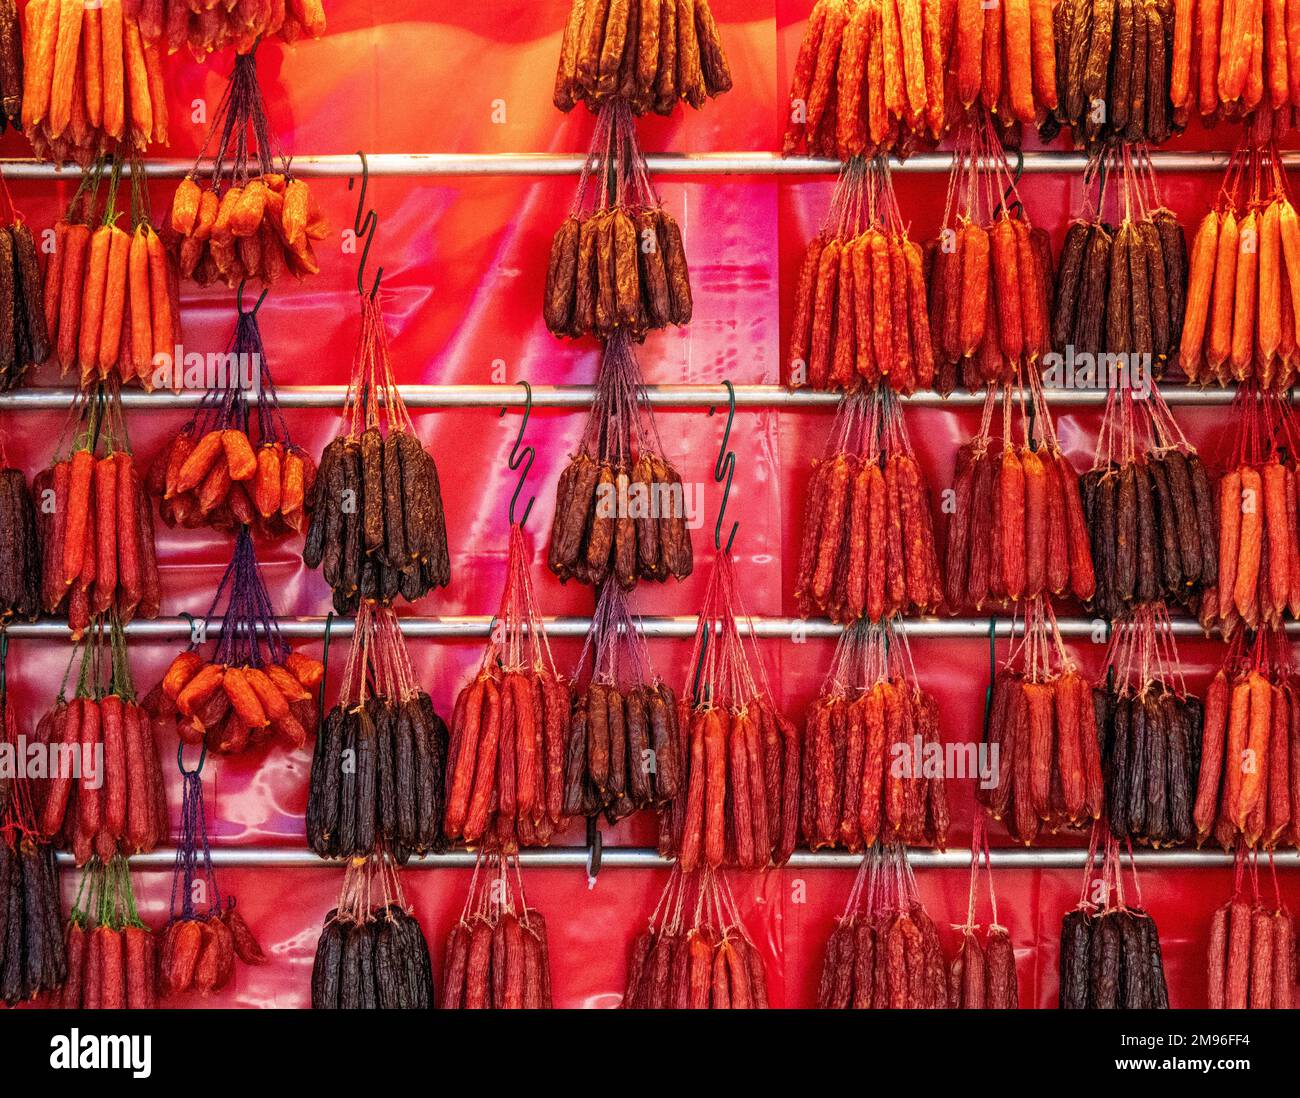 Market stall selling Chinese dried cured sausages for Chinese New Year in Chinatown Singapore. Stock Photo